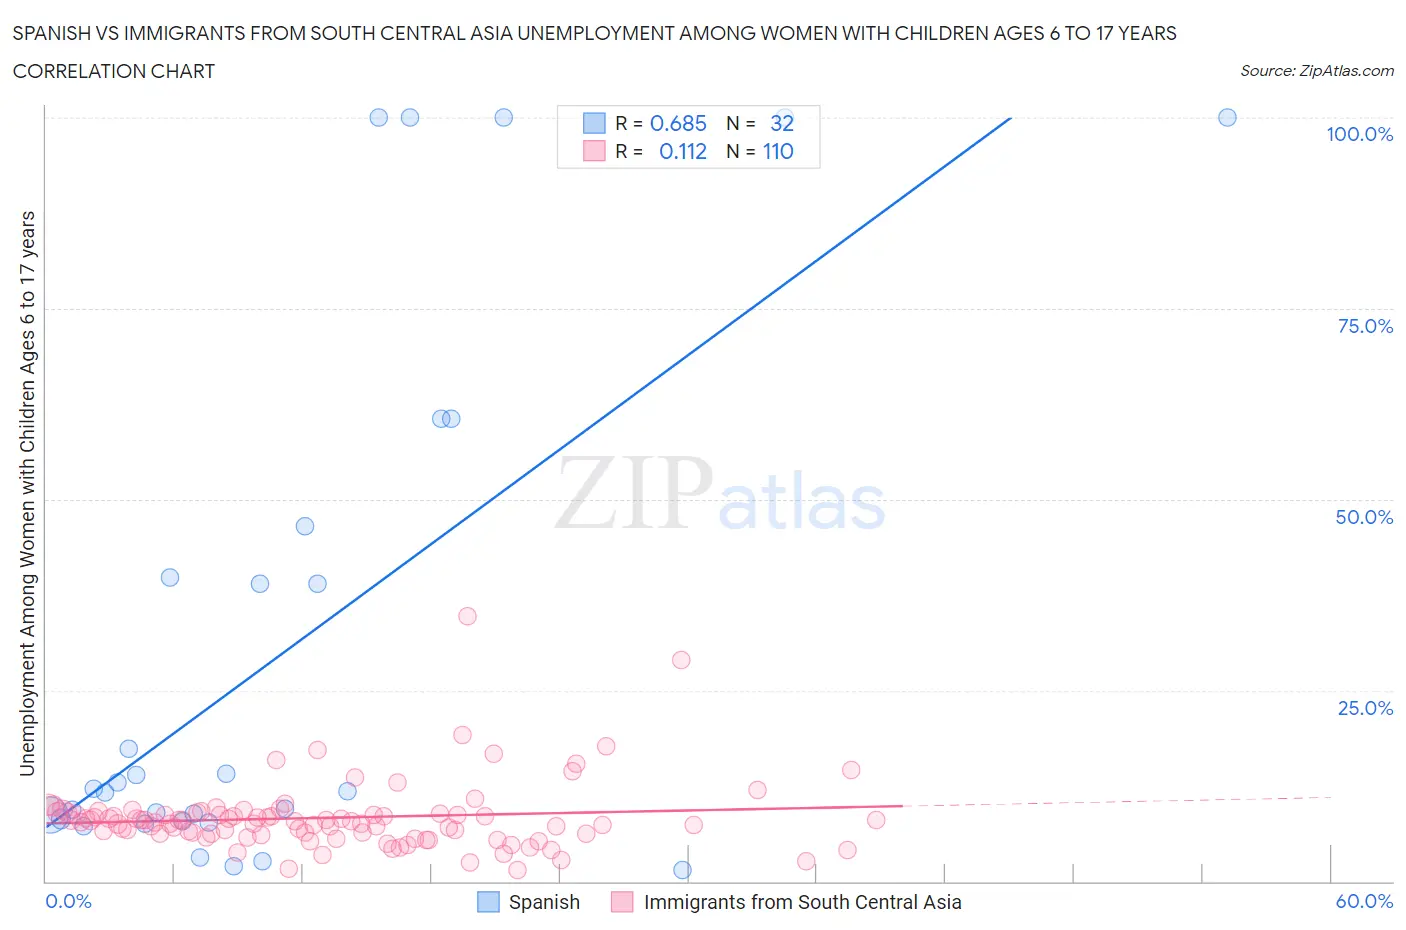 Spanish vs Immigrants from South Central Asia Unemployment Among Women with Children Ages 6 to 17 years